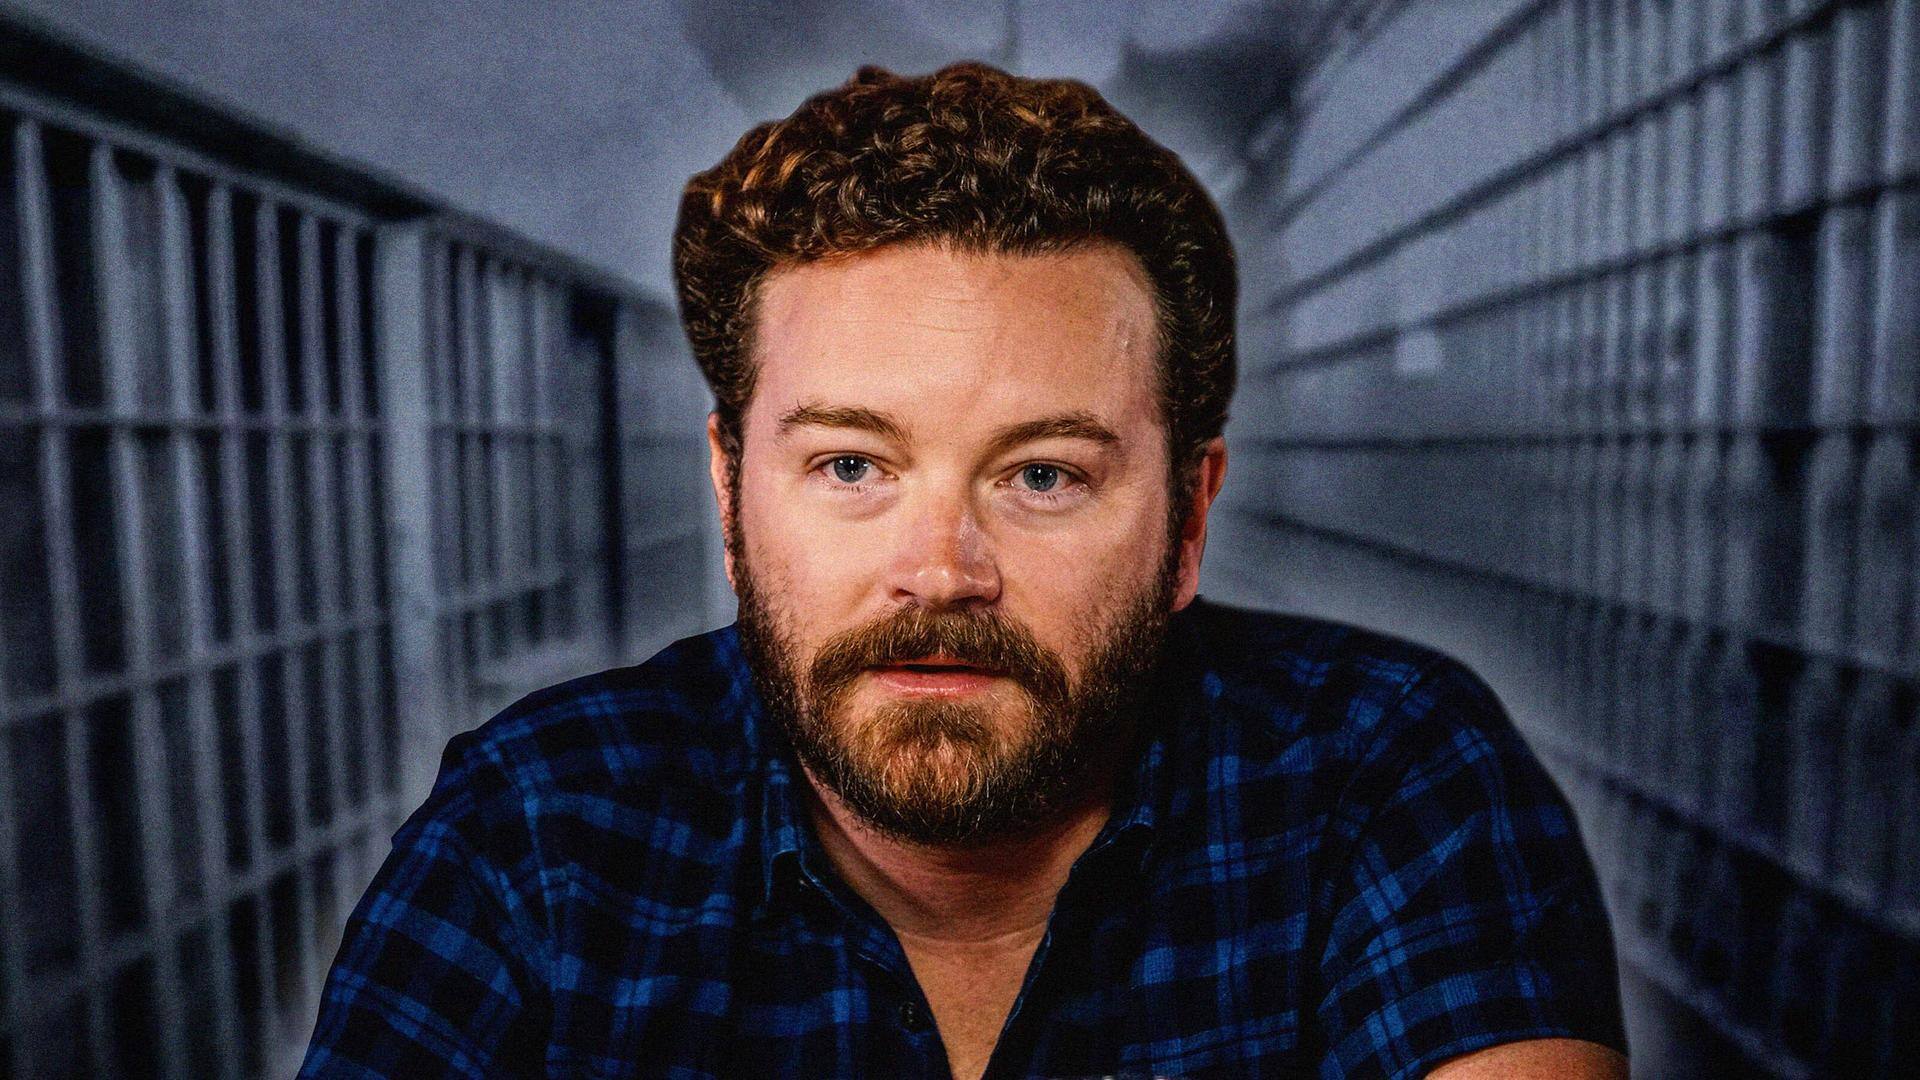 Danny Masterson of 'That 70s Show' fame, convicted of rape